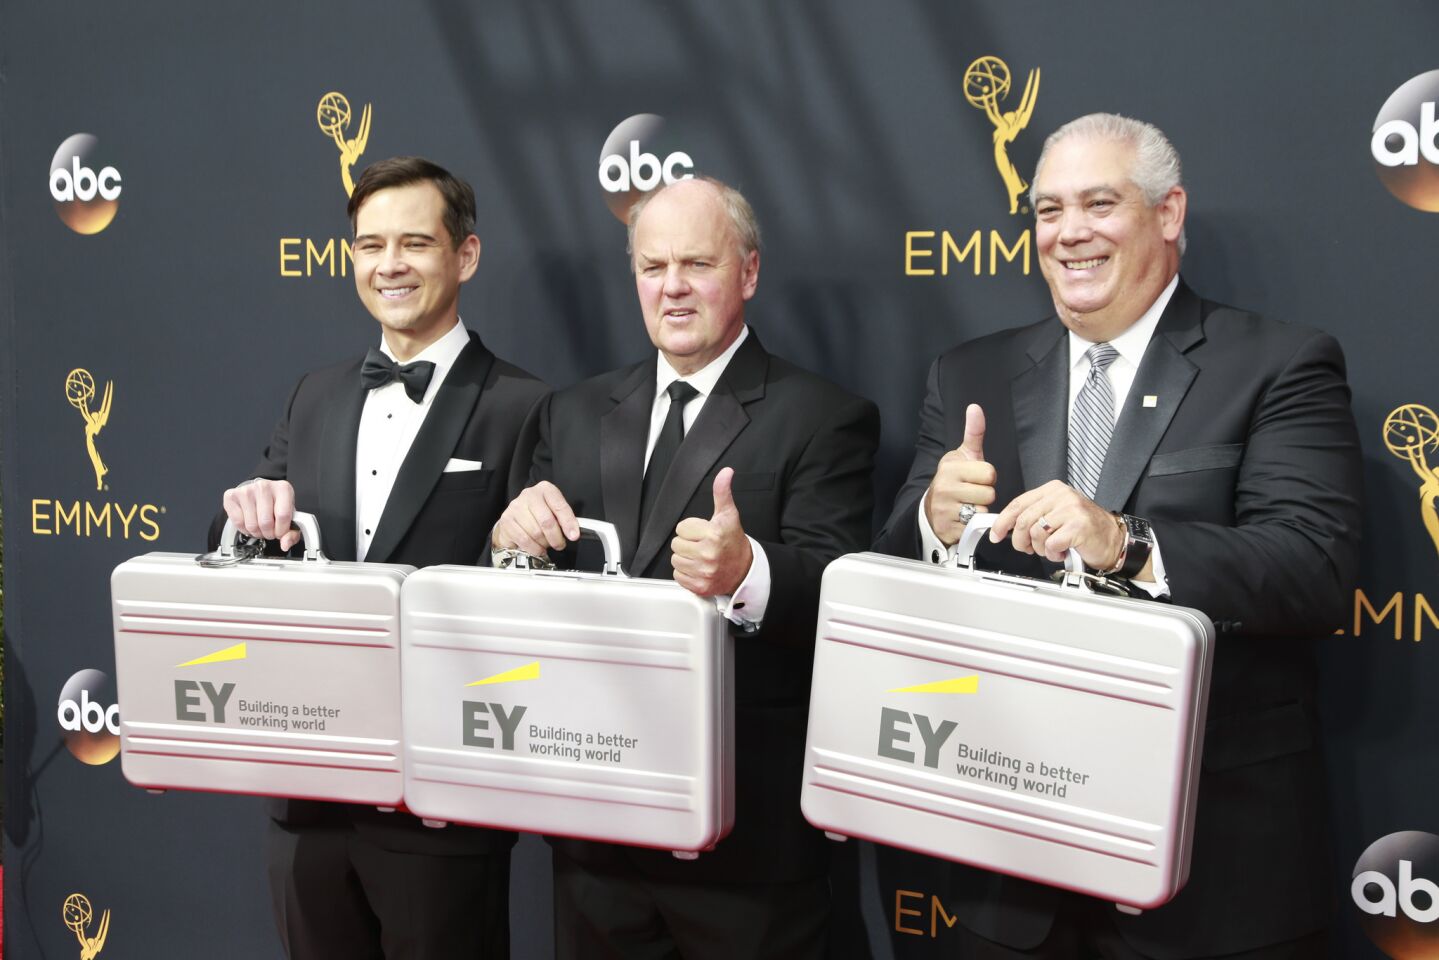 Representatives of Ernst & Young arrive with the winners at the 68th Primetime Emmy Awards at Microsoft Theater in Los Angeles.